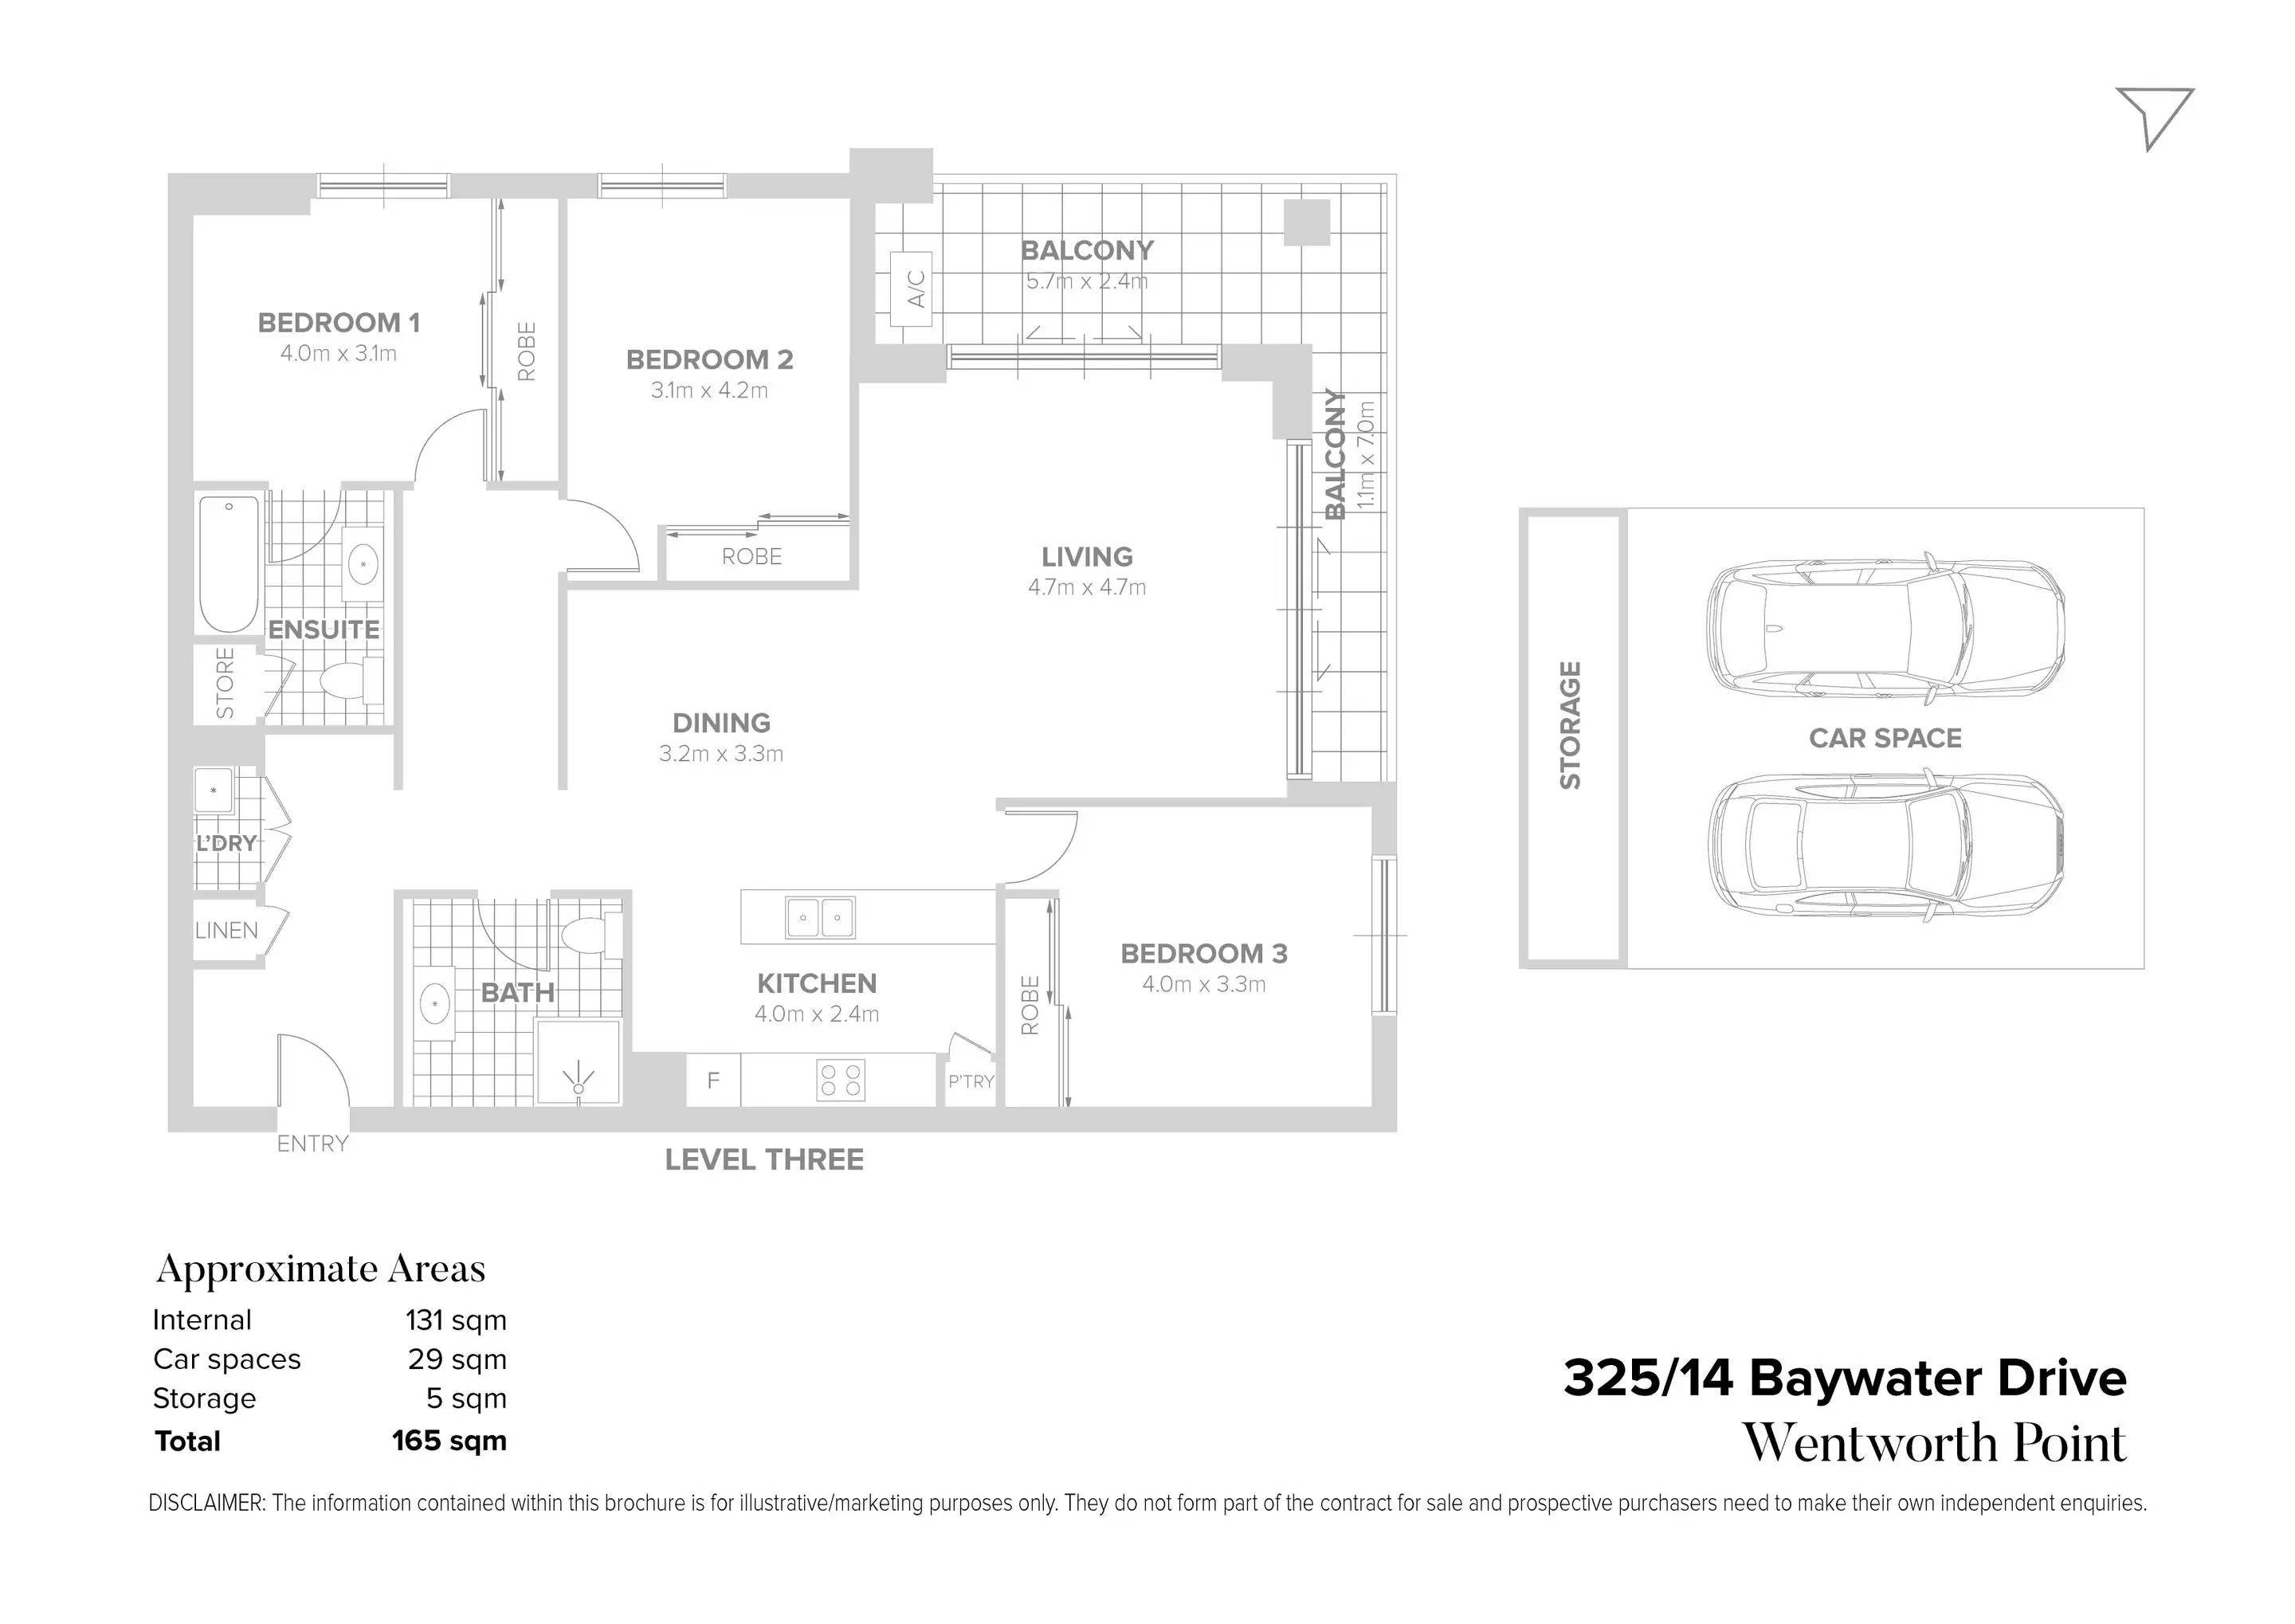 325/14 Baywater Drive, Wentworth Point Sold by Chidiac Realty - floorplan